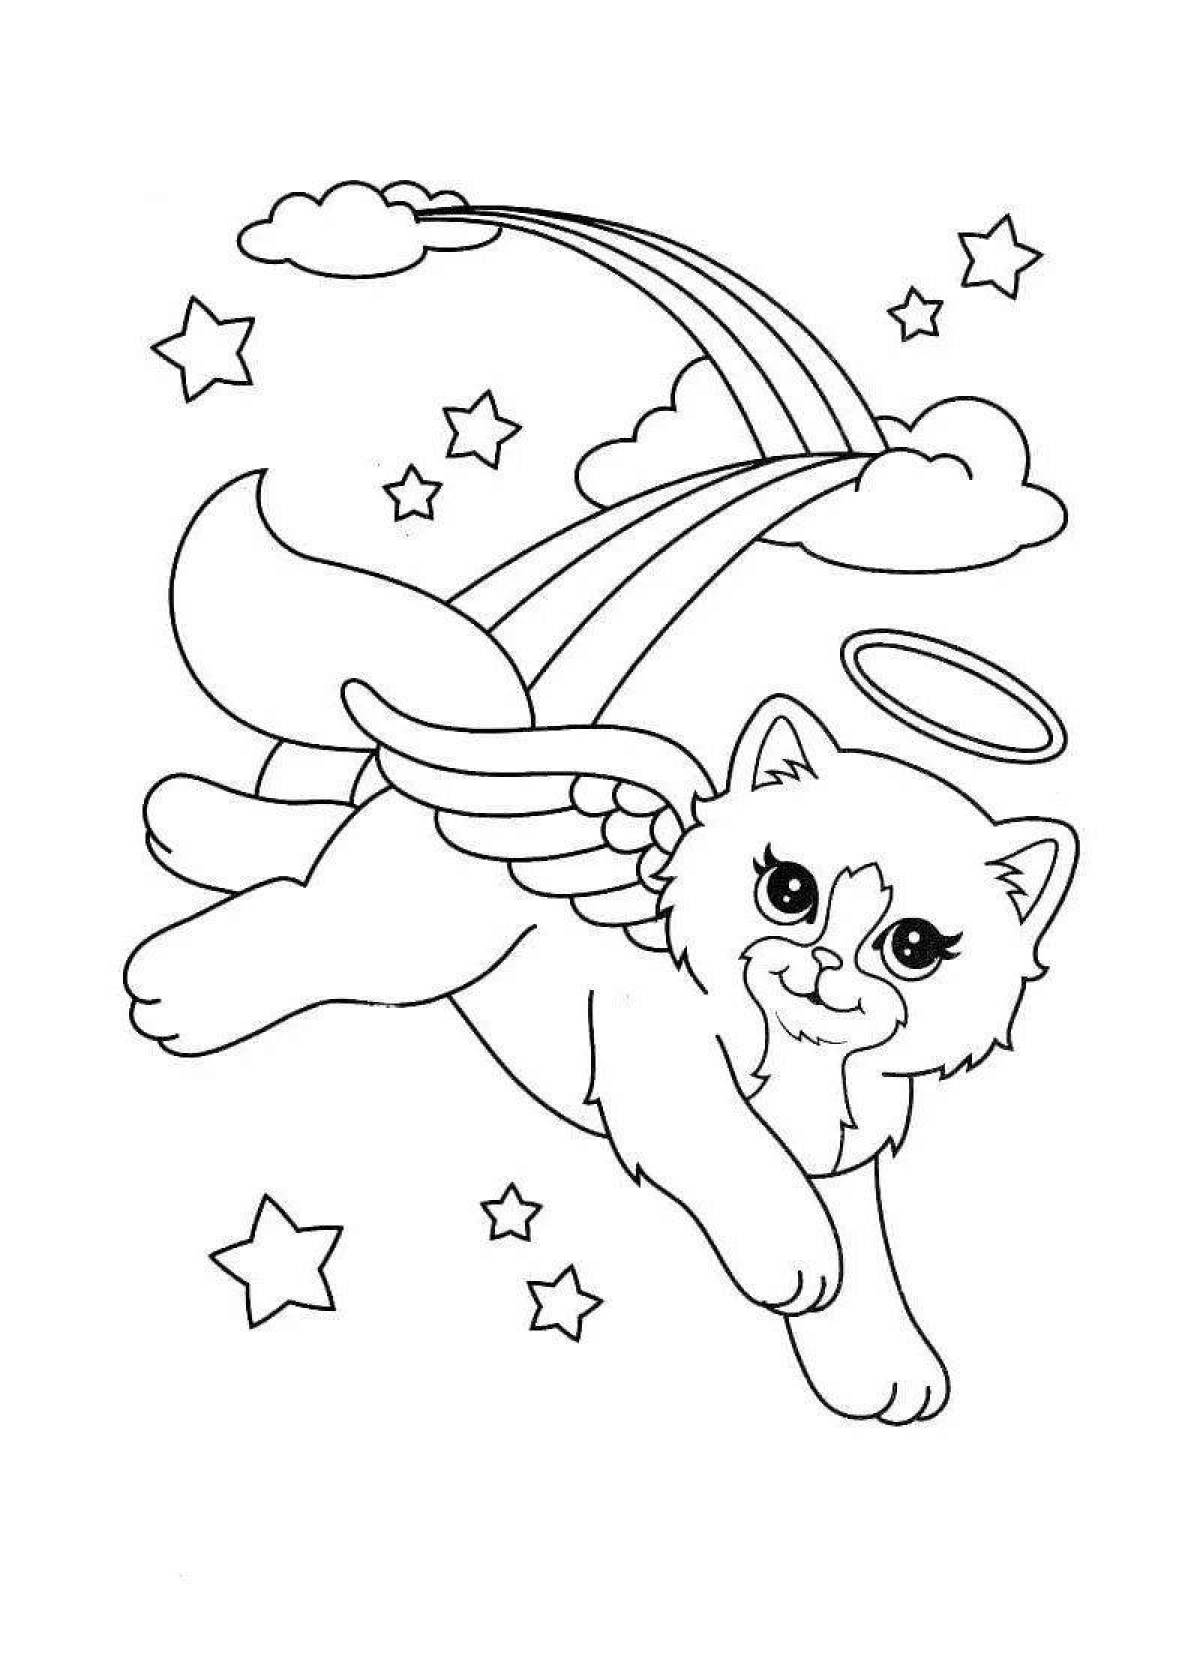 Adorable magical cats coloring page